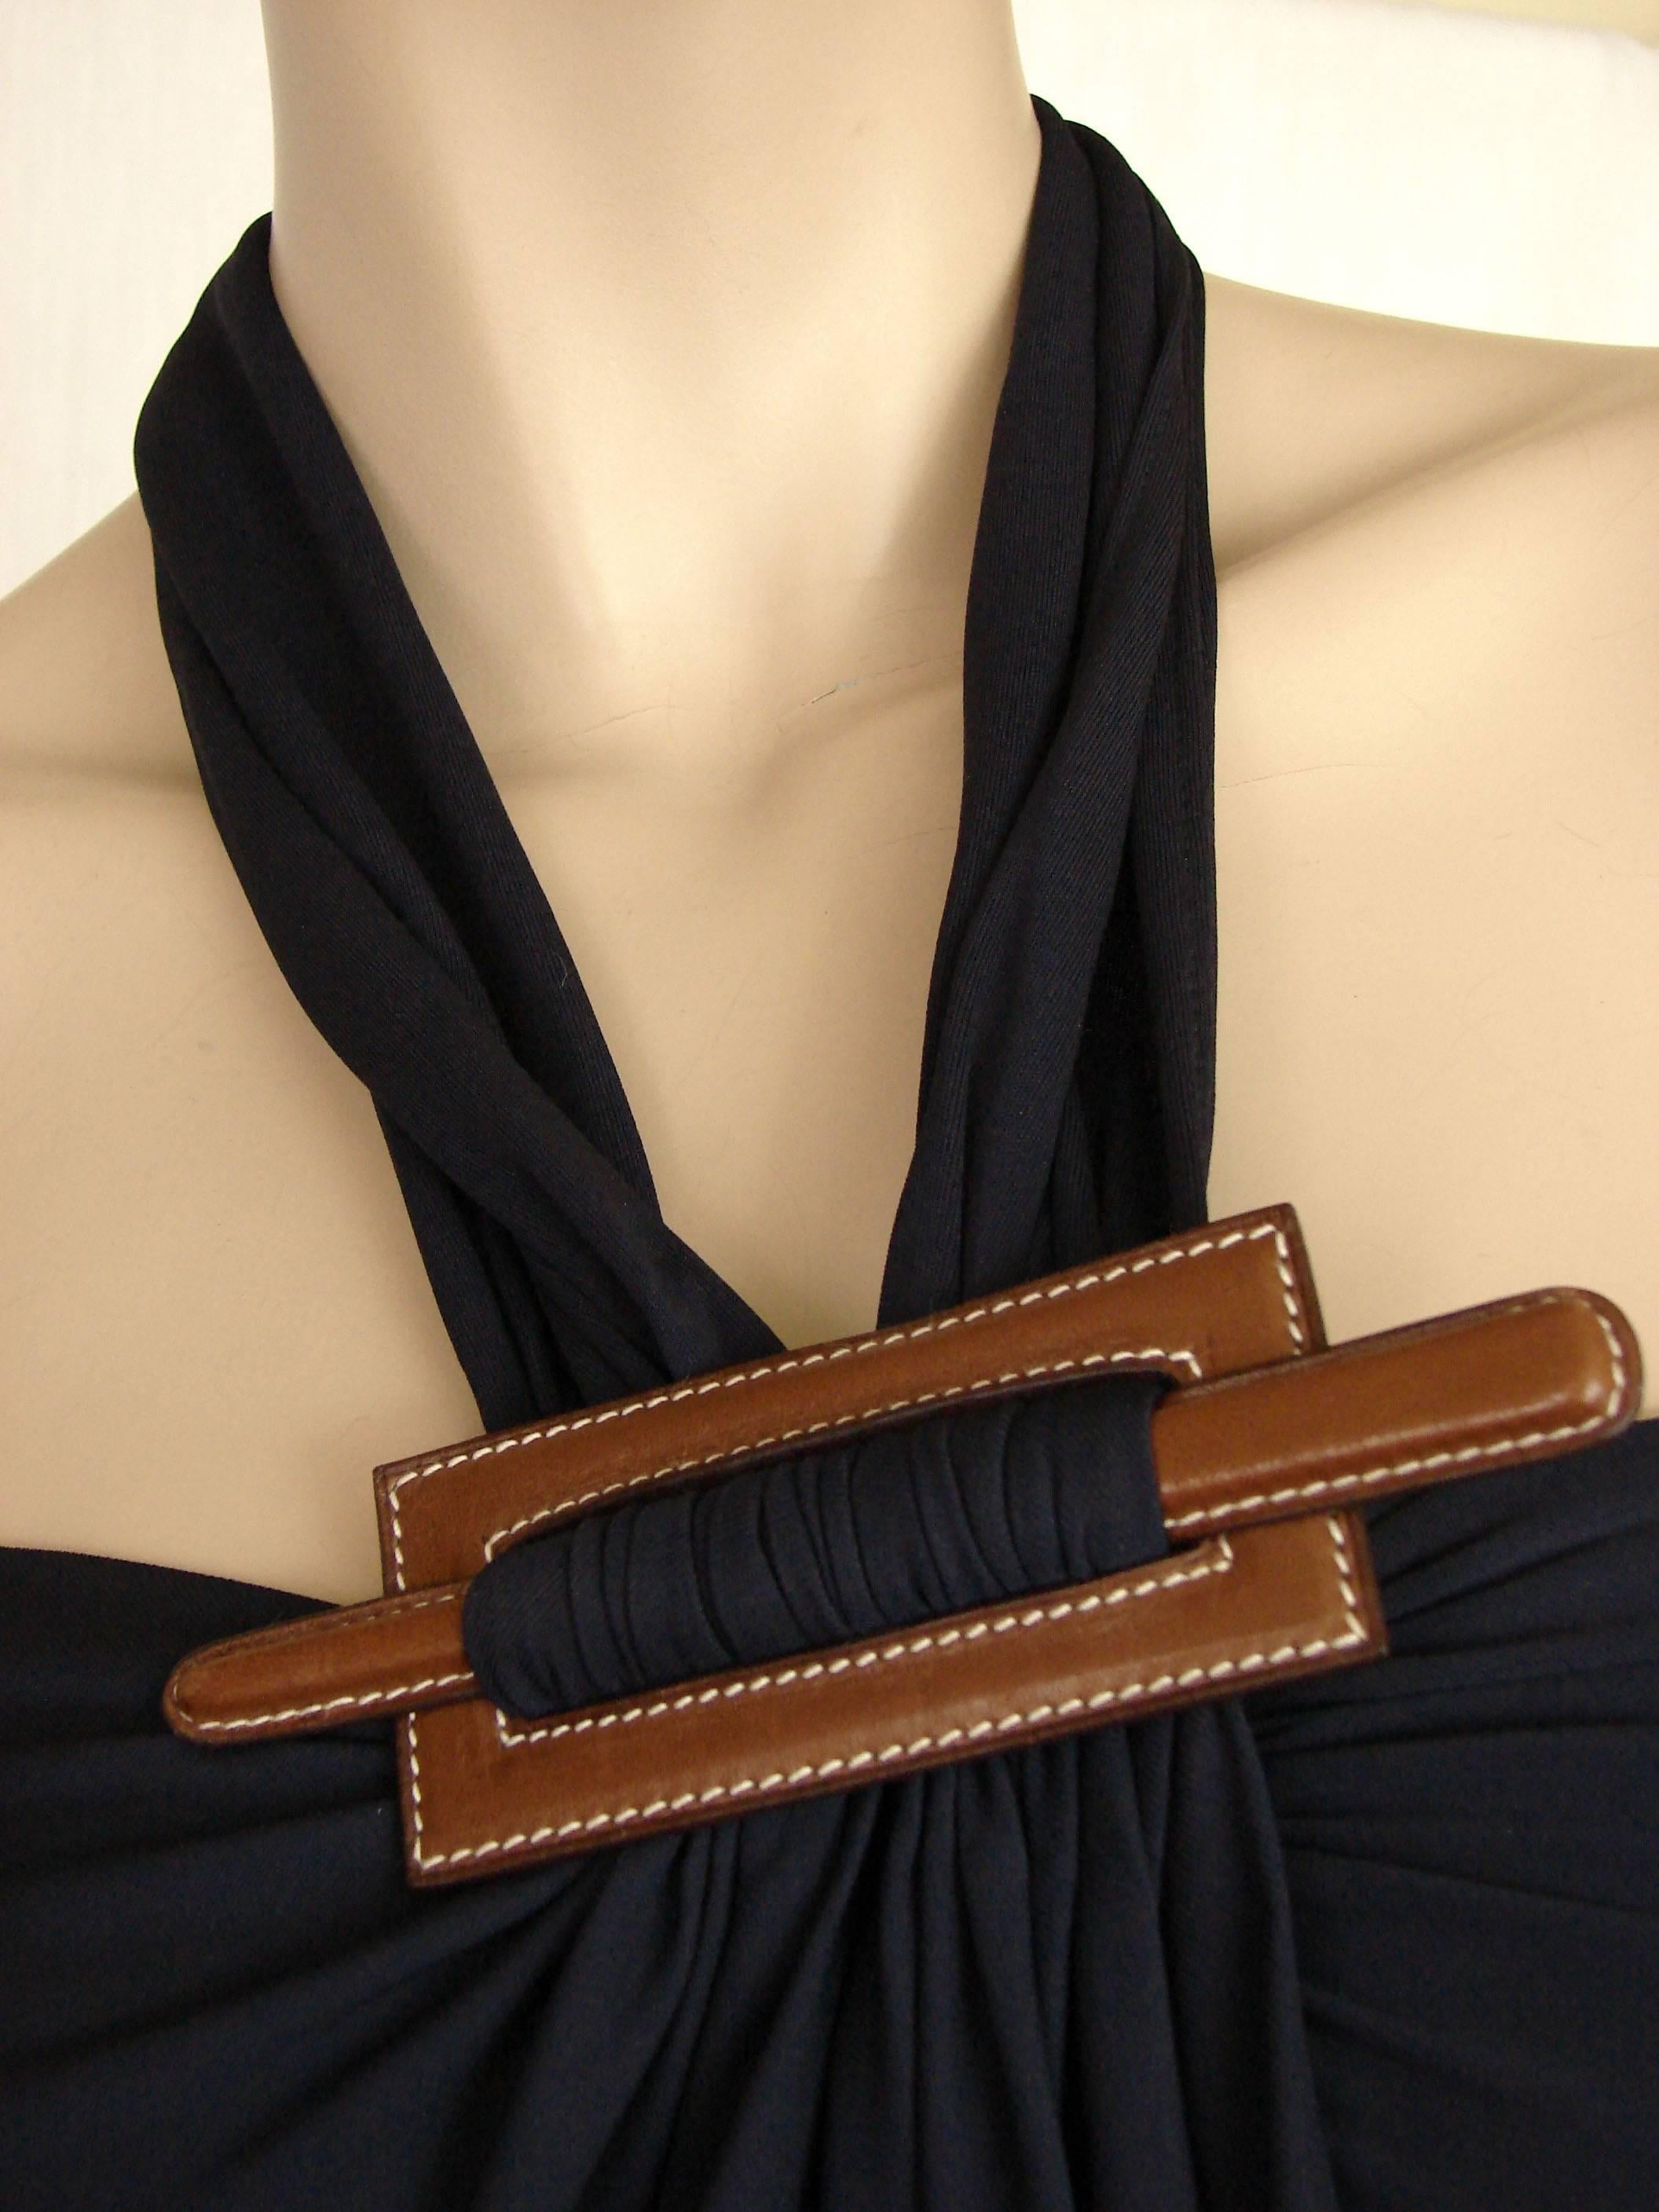 This incredibly chic long dress or gown is from Hermes and was designed by Jean Paul Gaultier in 2007.  Made from a navy viscose jersey fabric, it features a Barenia leather focal point at the chest.  This piece fastens wrap style with simple